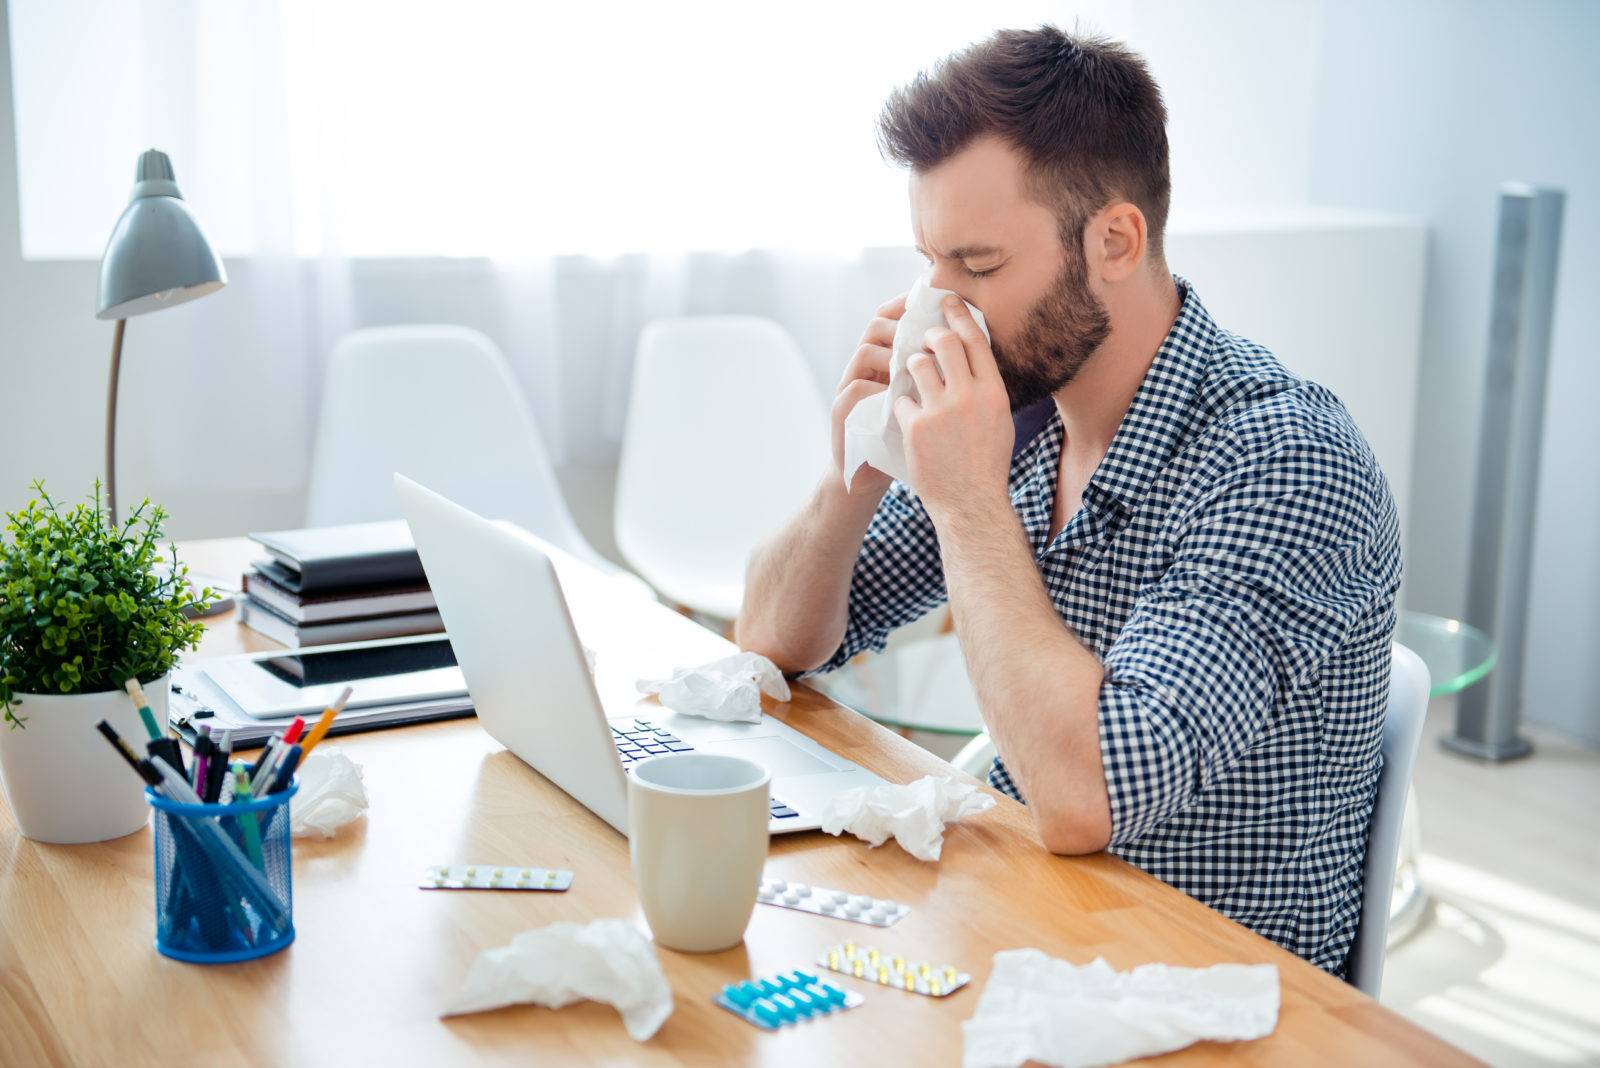 How to Comply with California Sick Leave Law